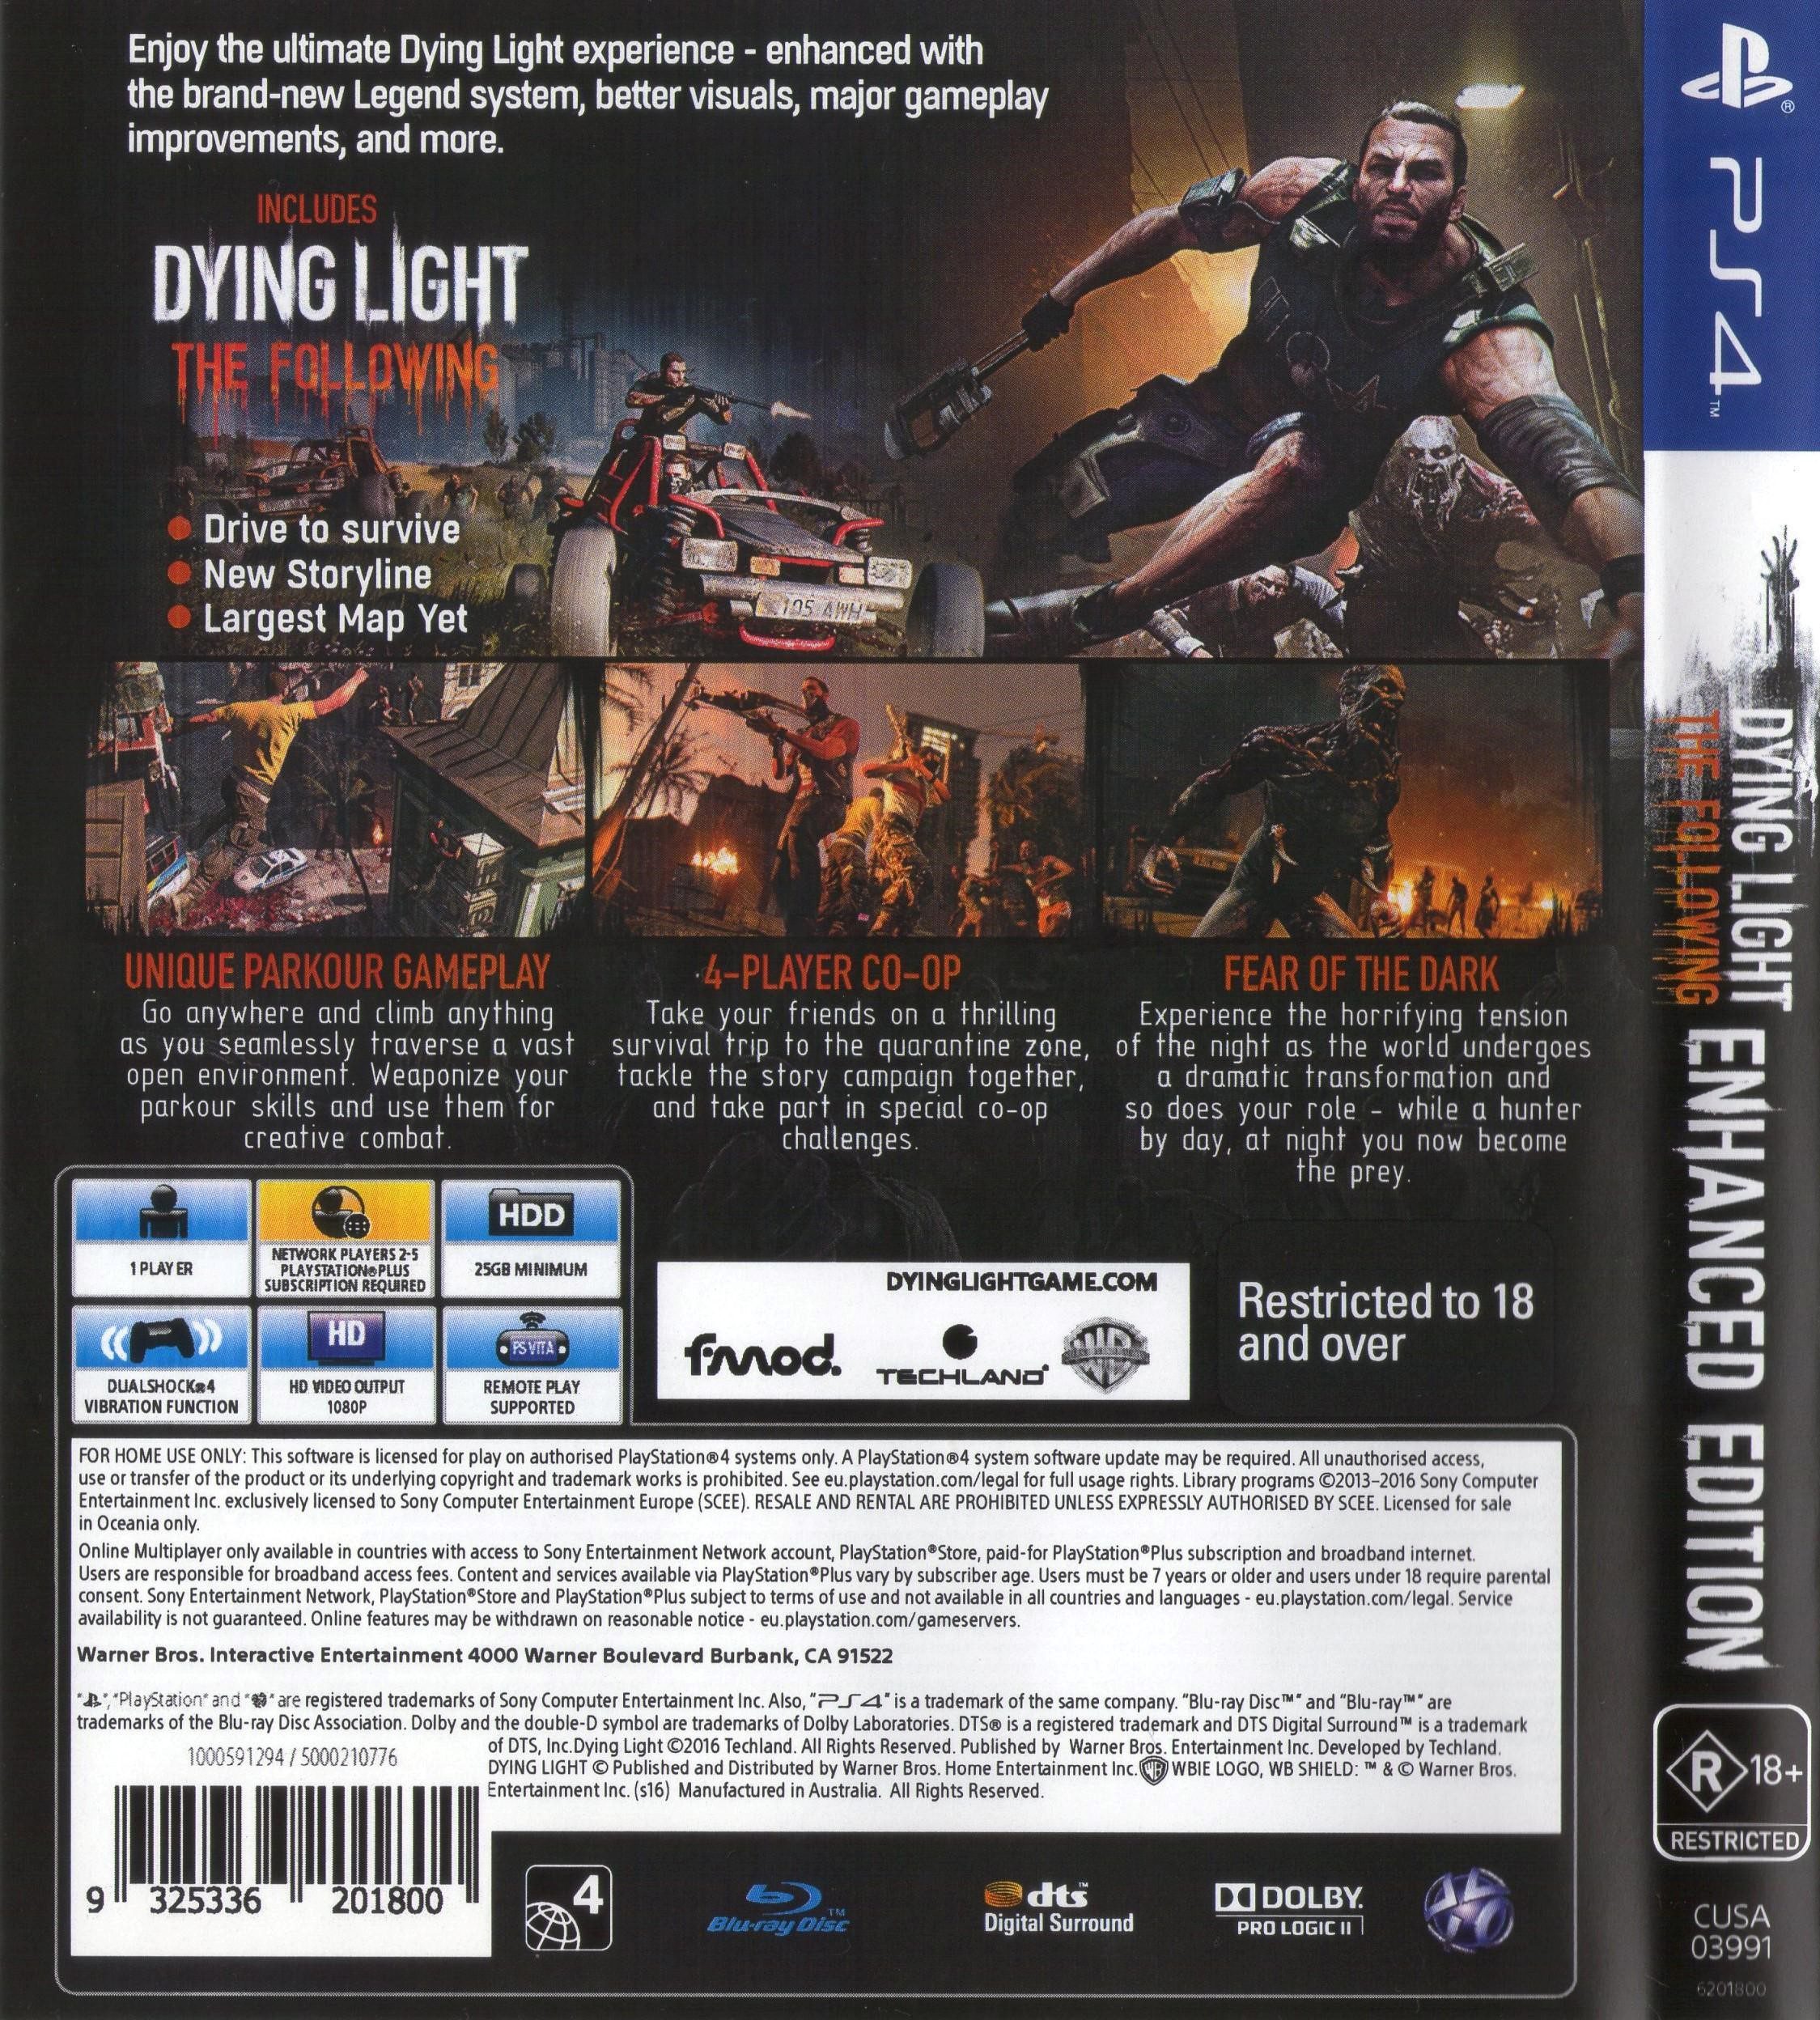 PS4 DYING LIGHT THE FOLLOWING: Enhanced Edition 51951 from Japan